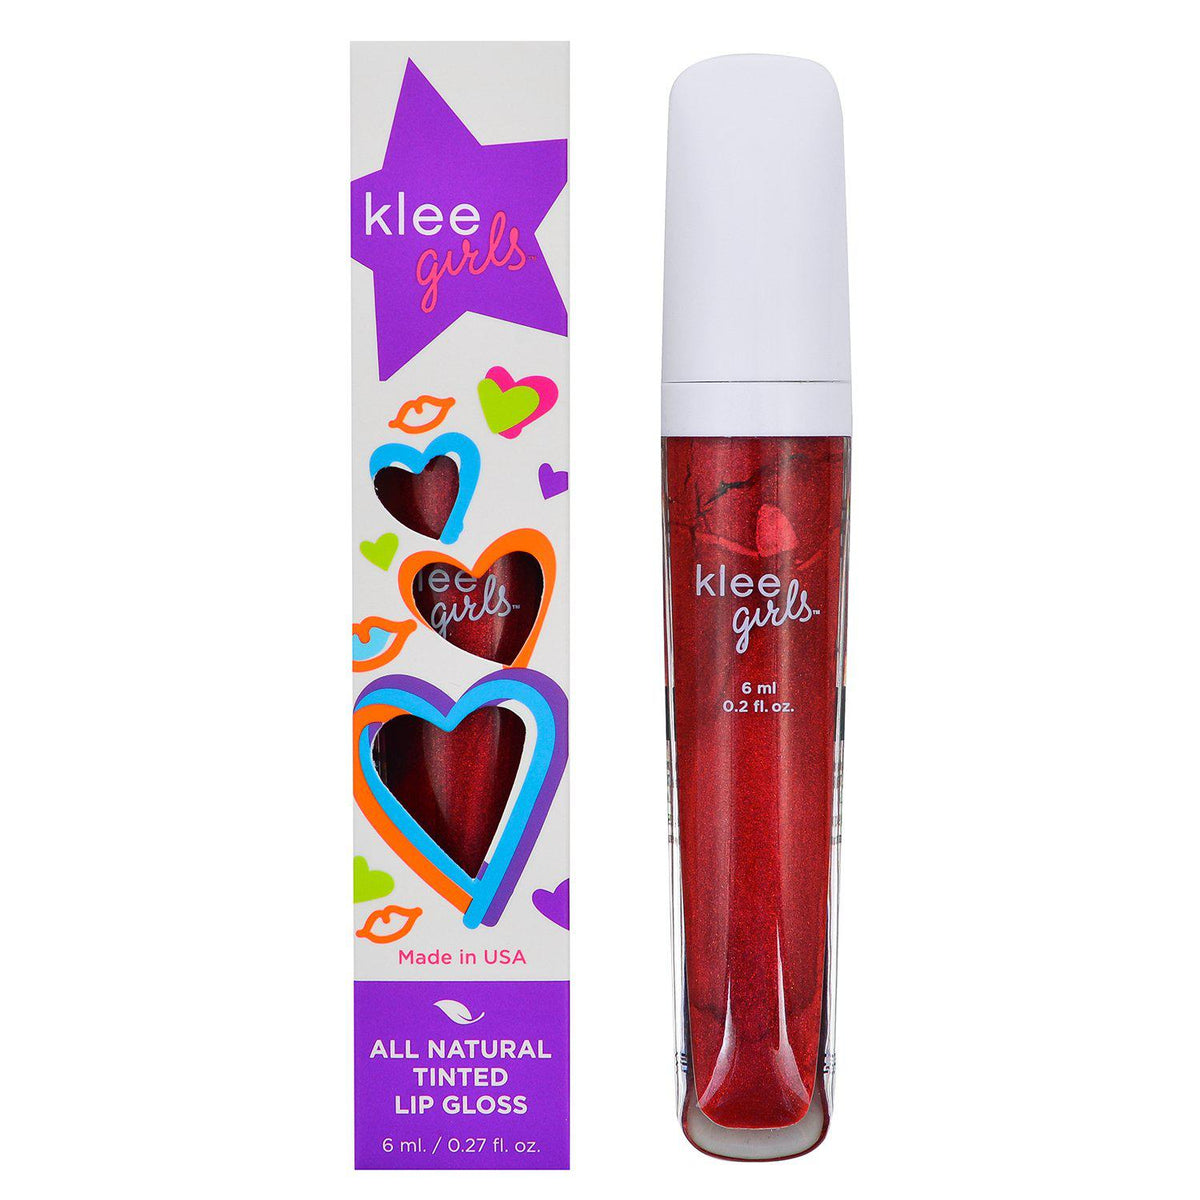 Klee sequoia beat lip gloss with packaging.